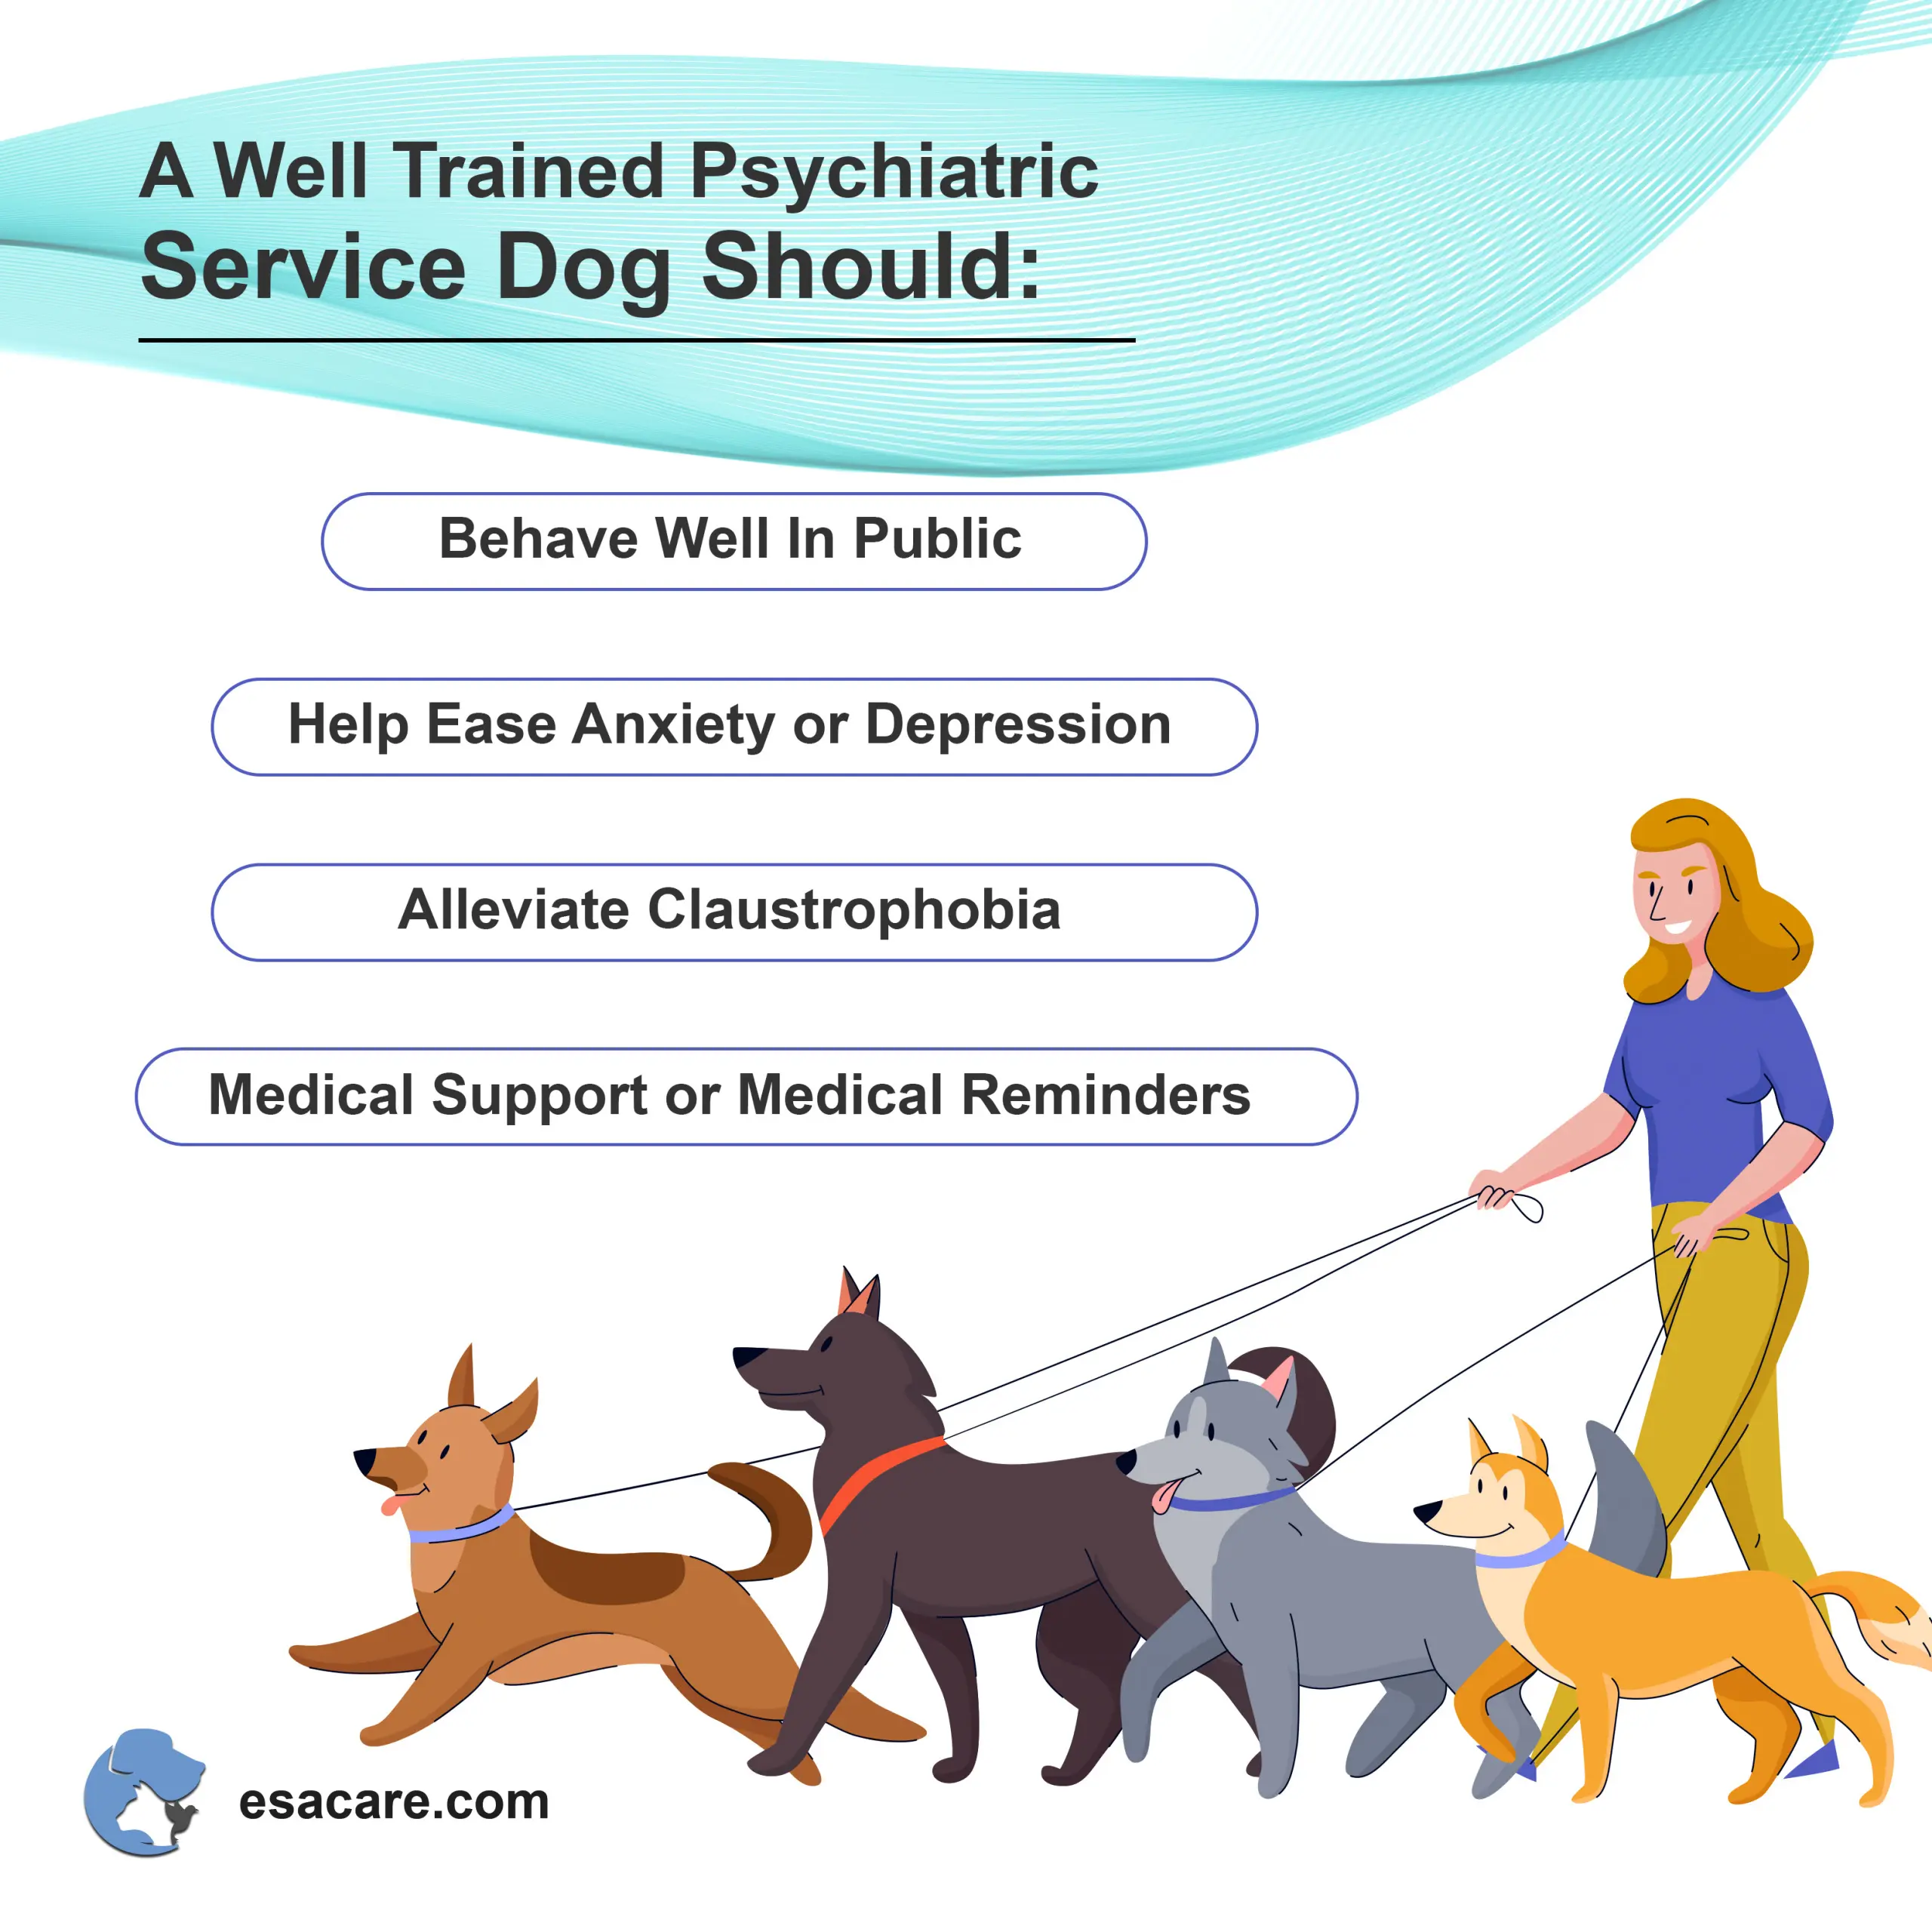 15 Must Haves You and Your Psychiatric Service Dog Can't Live